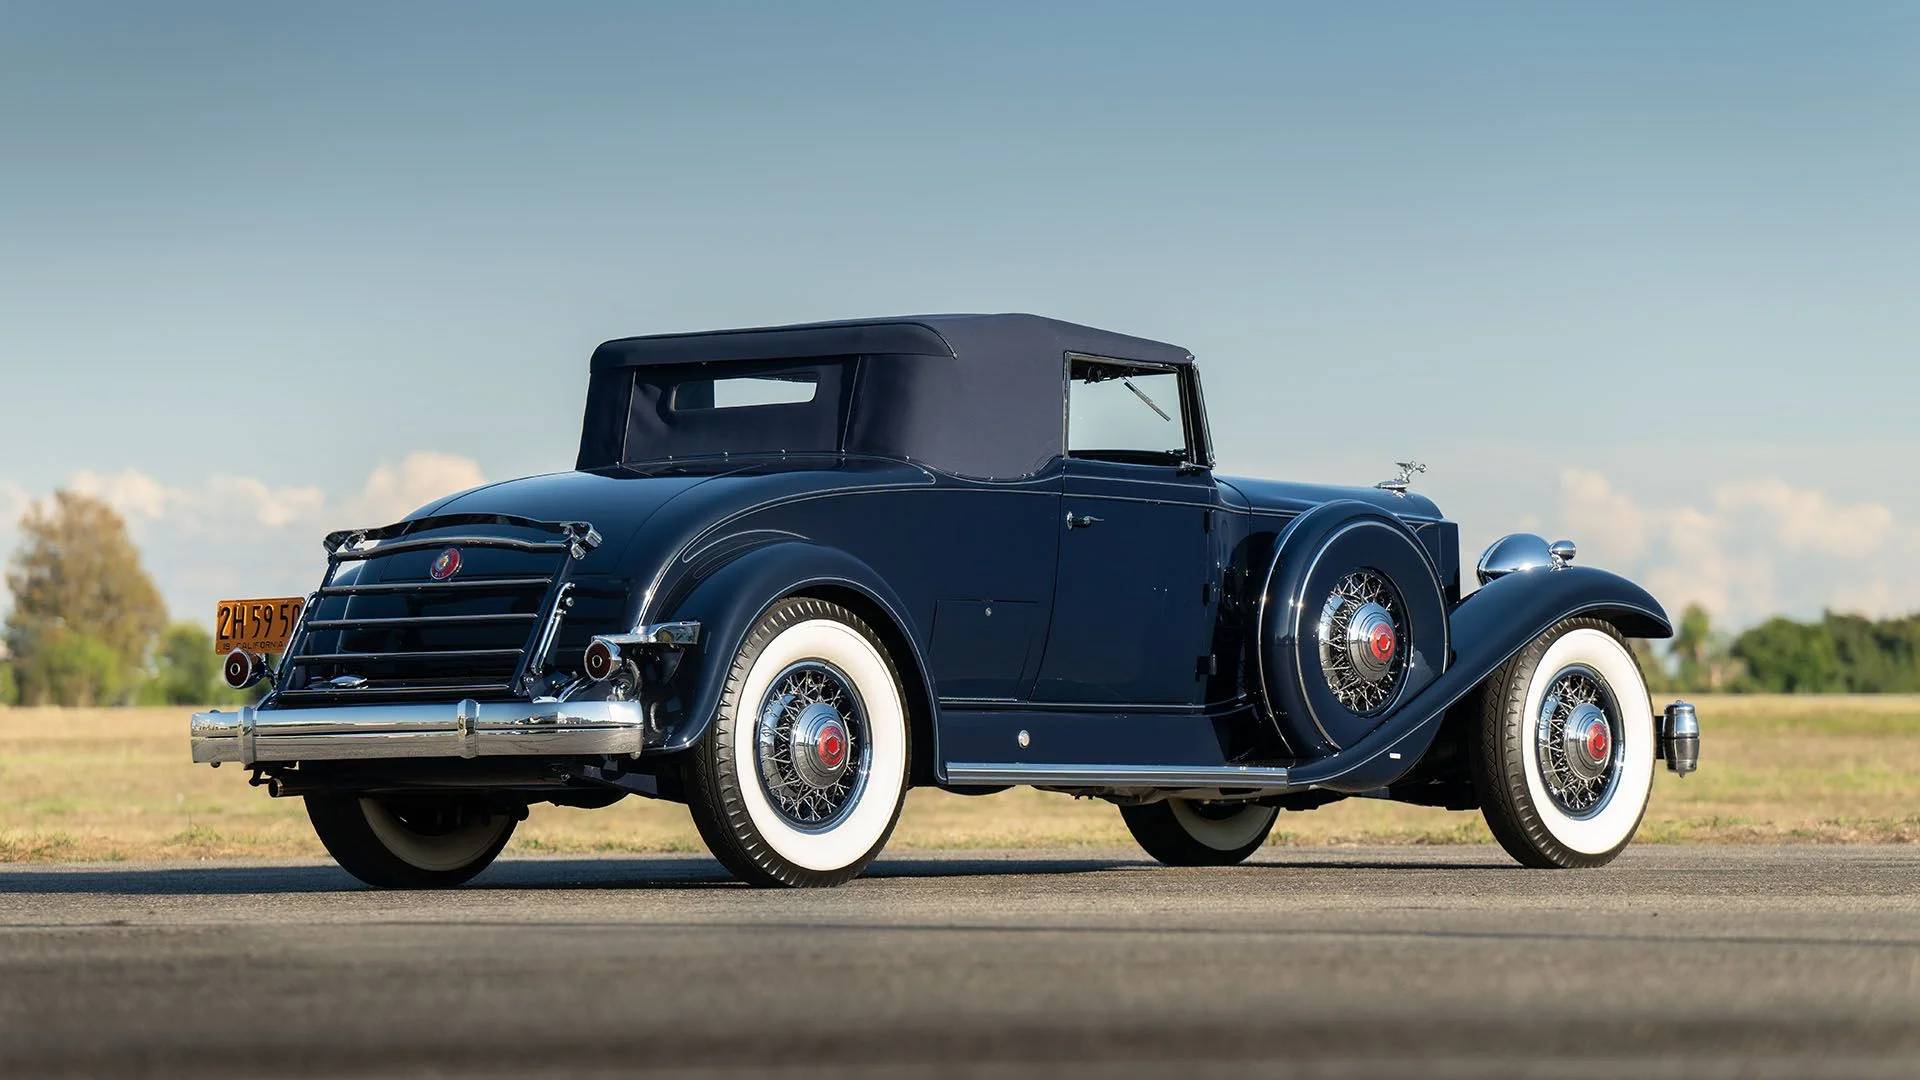 For Sale: Packard Twin-Six (1932) offered for Price on request